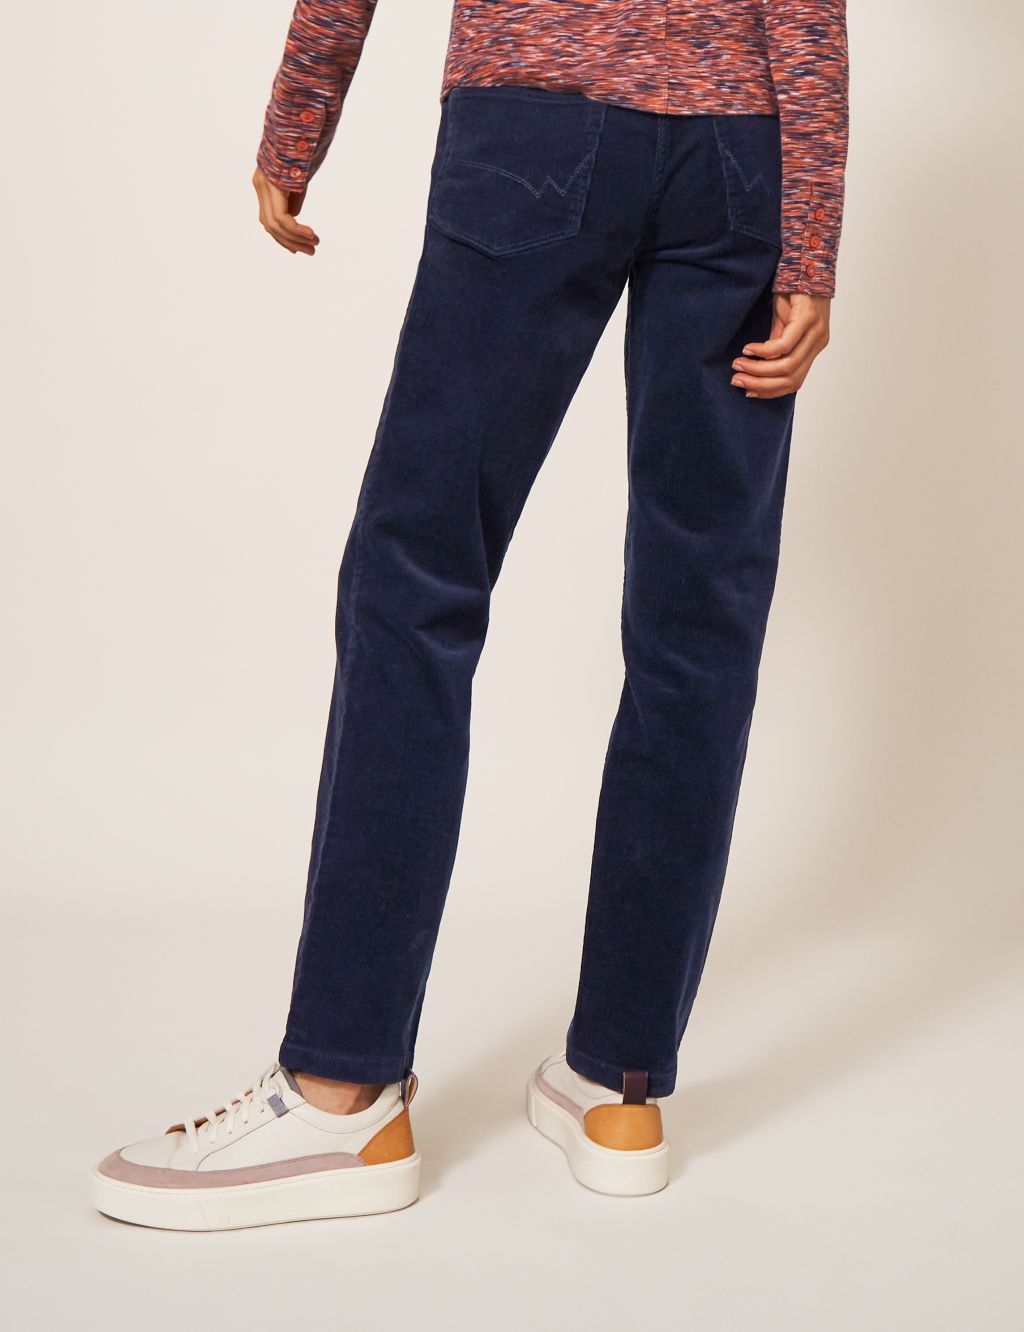 Cord Straight Leg Trousers image 4